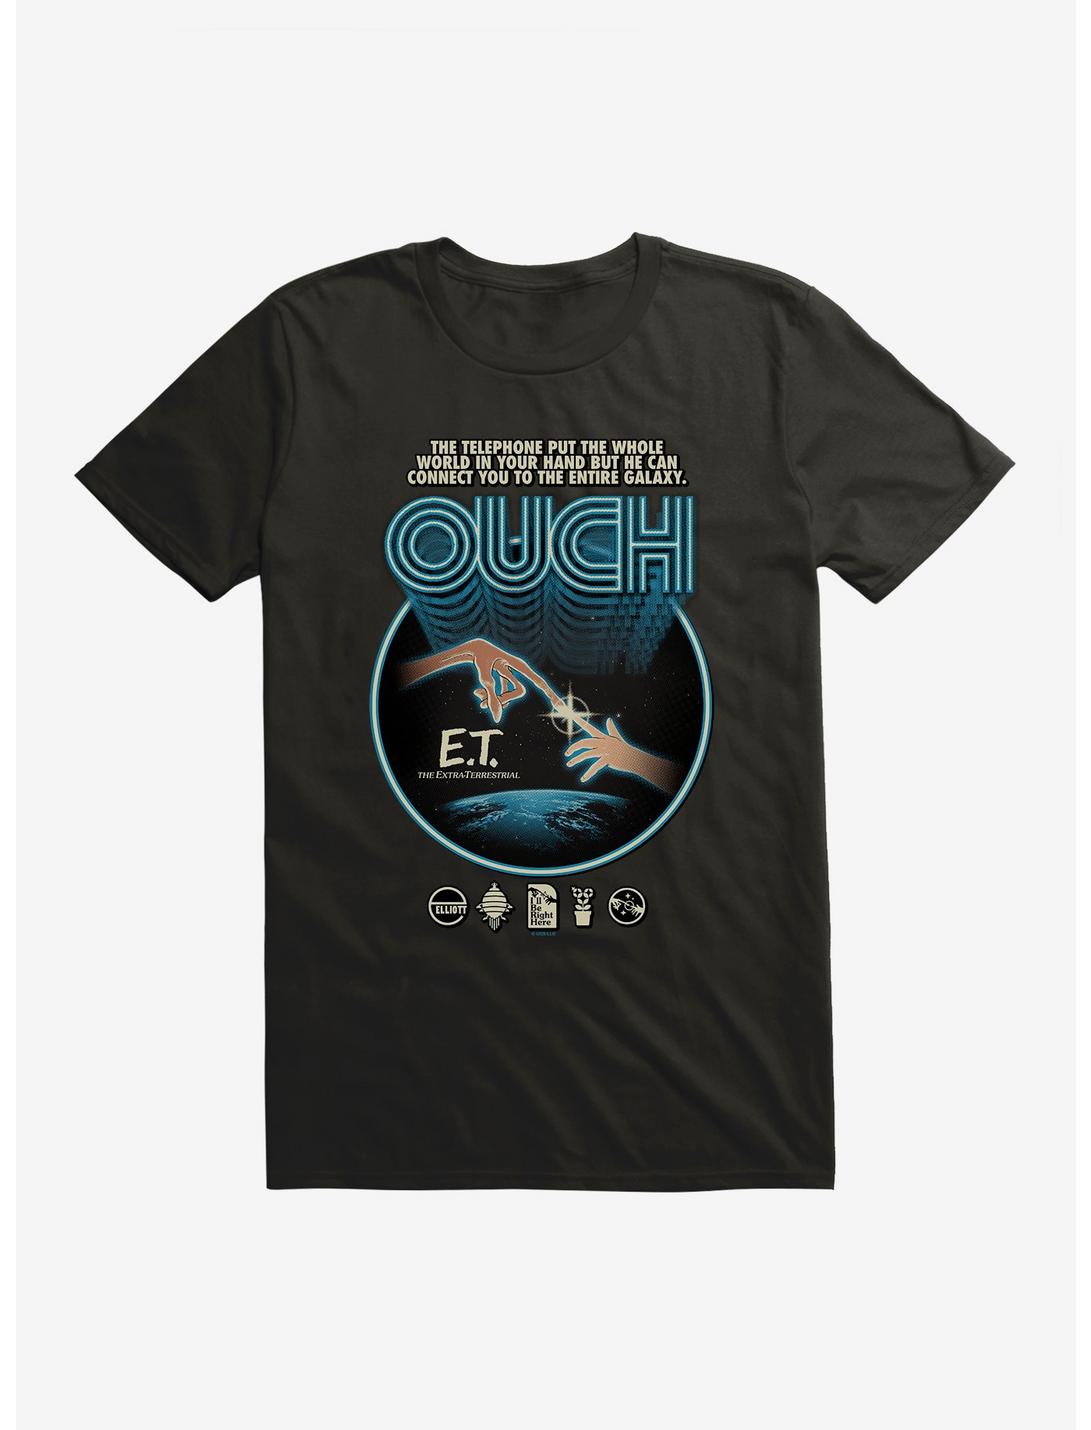 E.T. Ouch T-Shirt, , hi-res